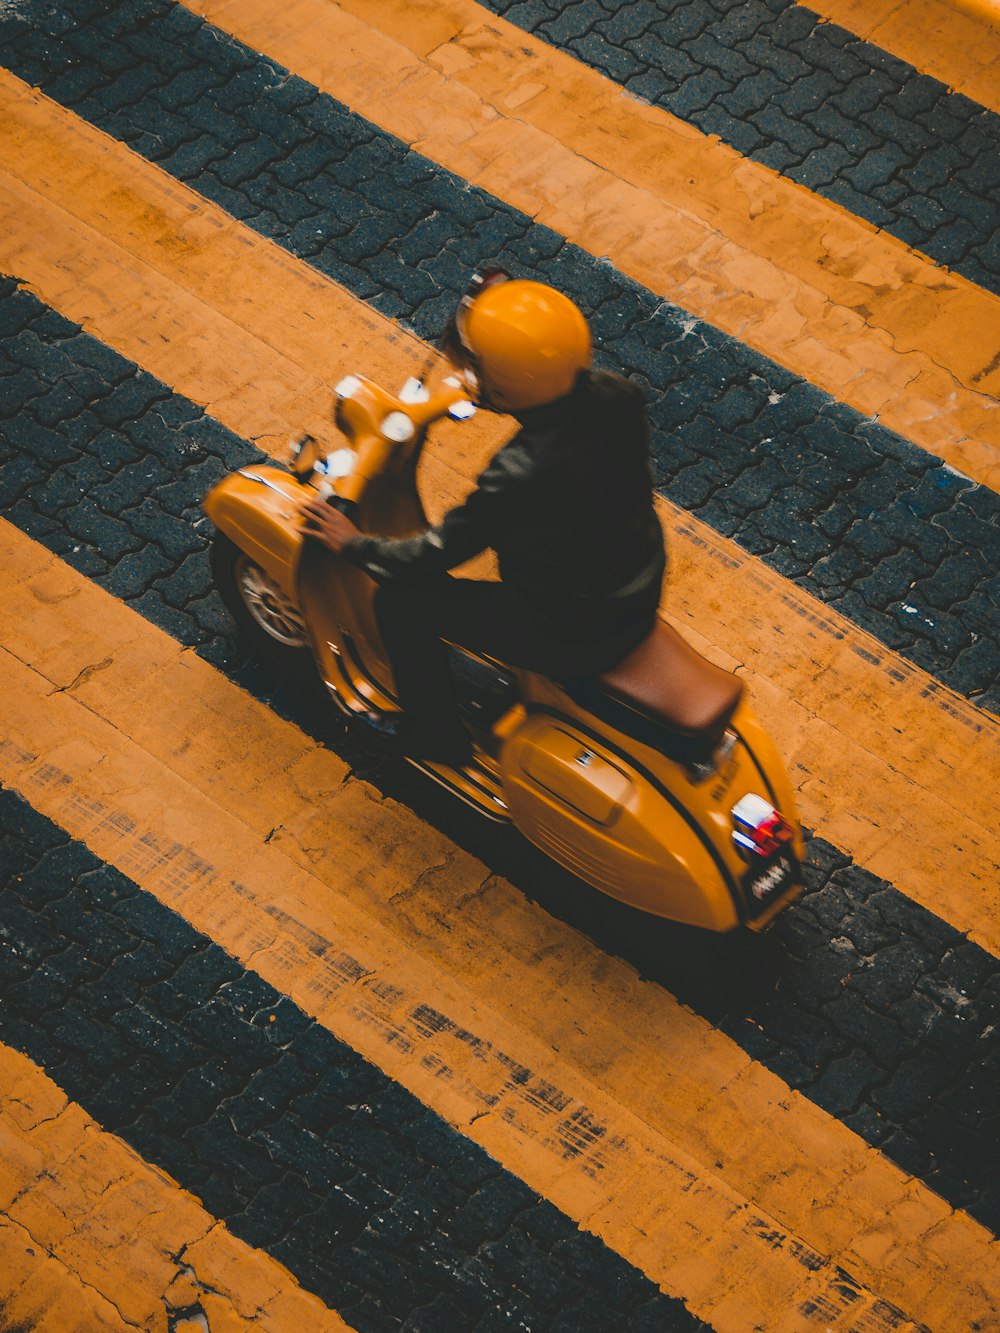 man riding on yellow motor scooter on striped yellow lines